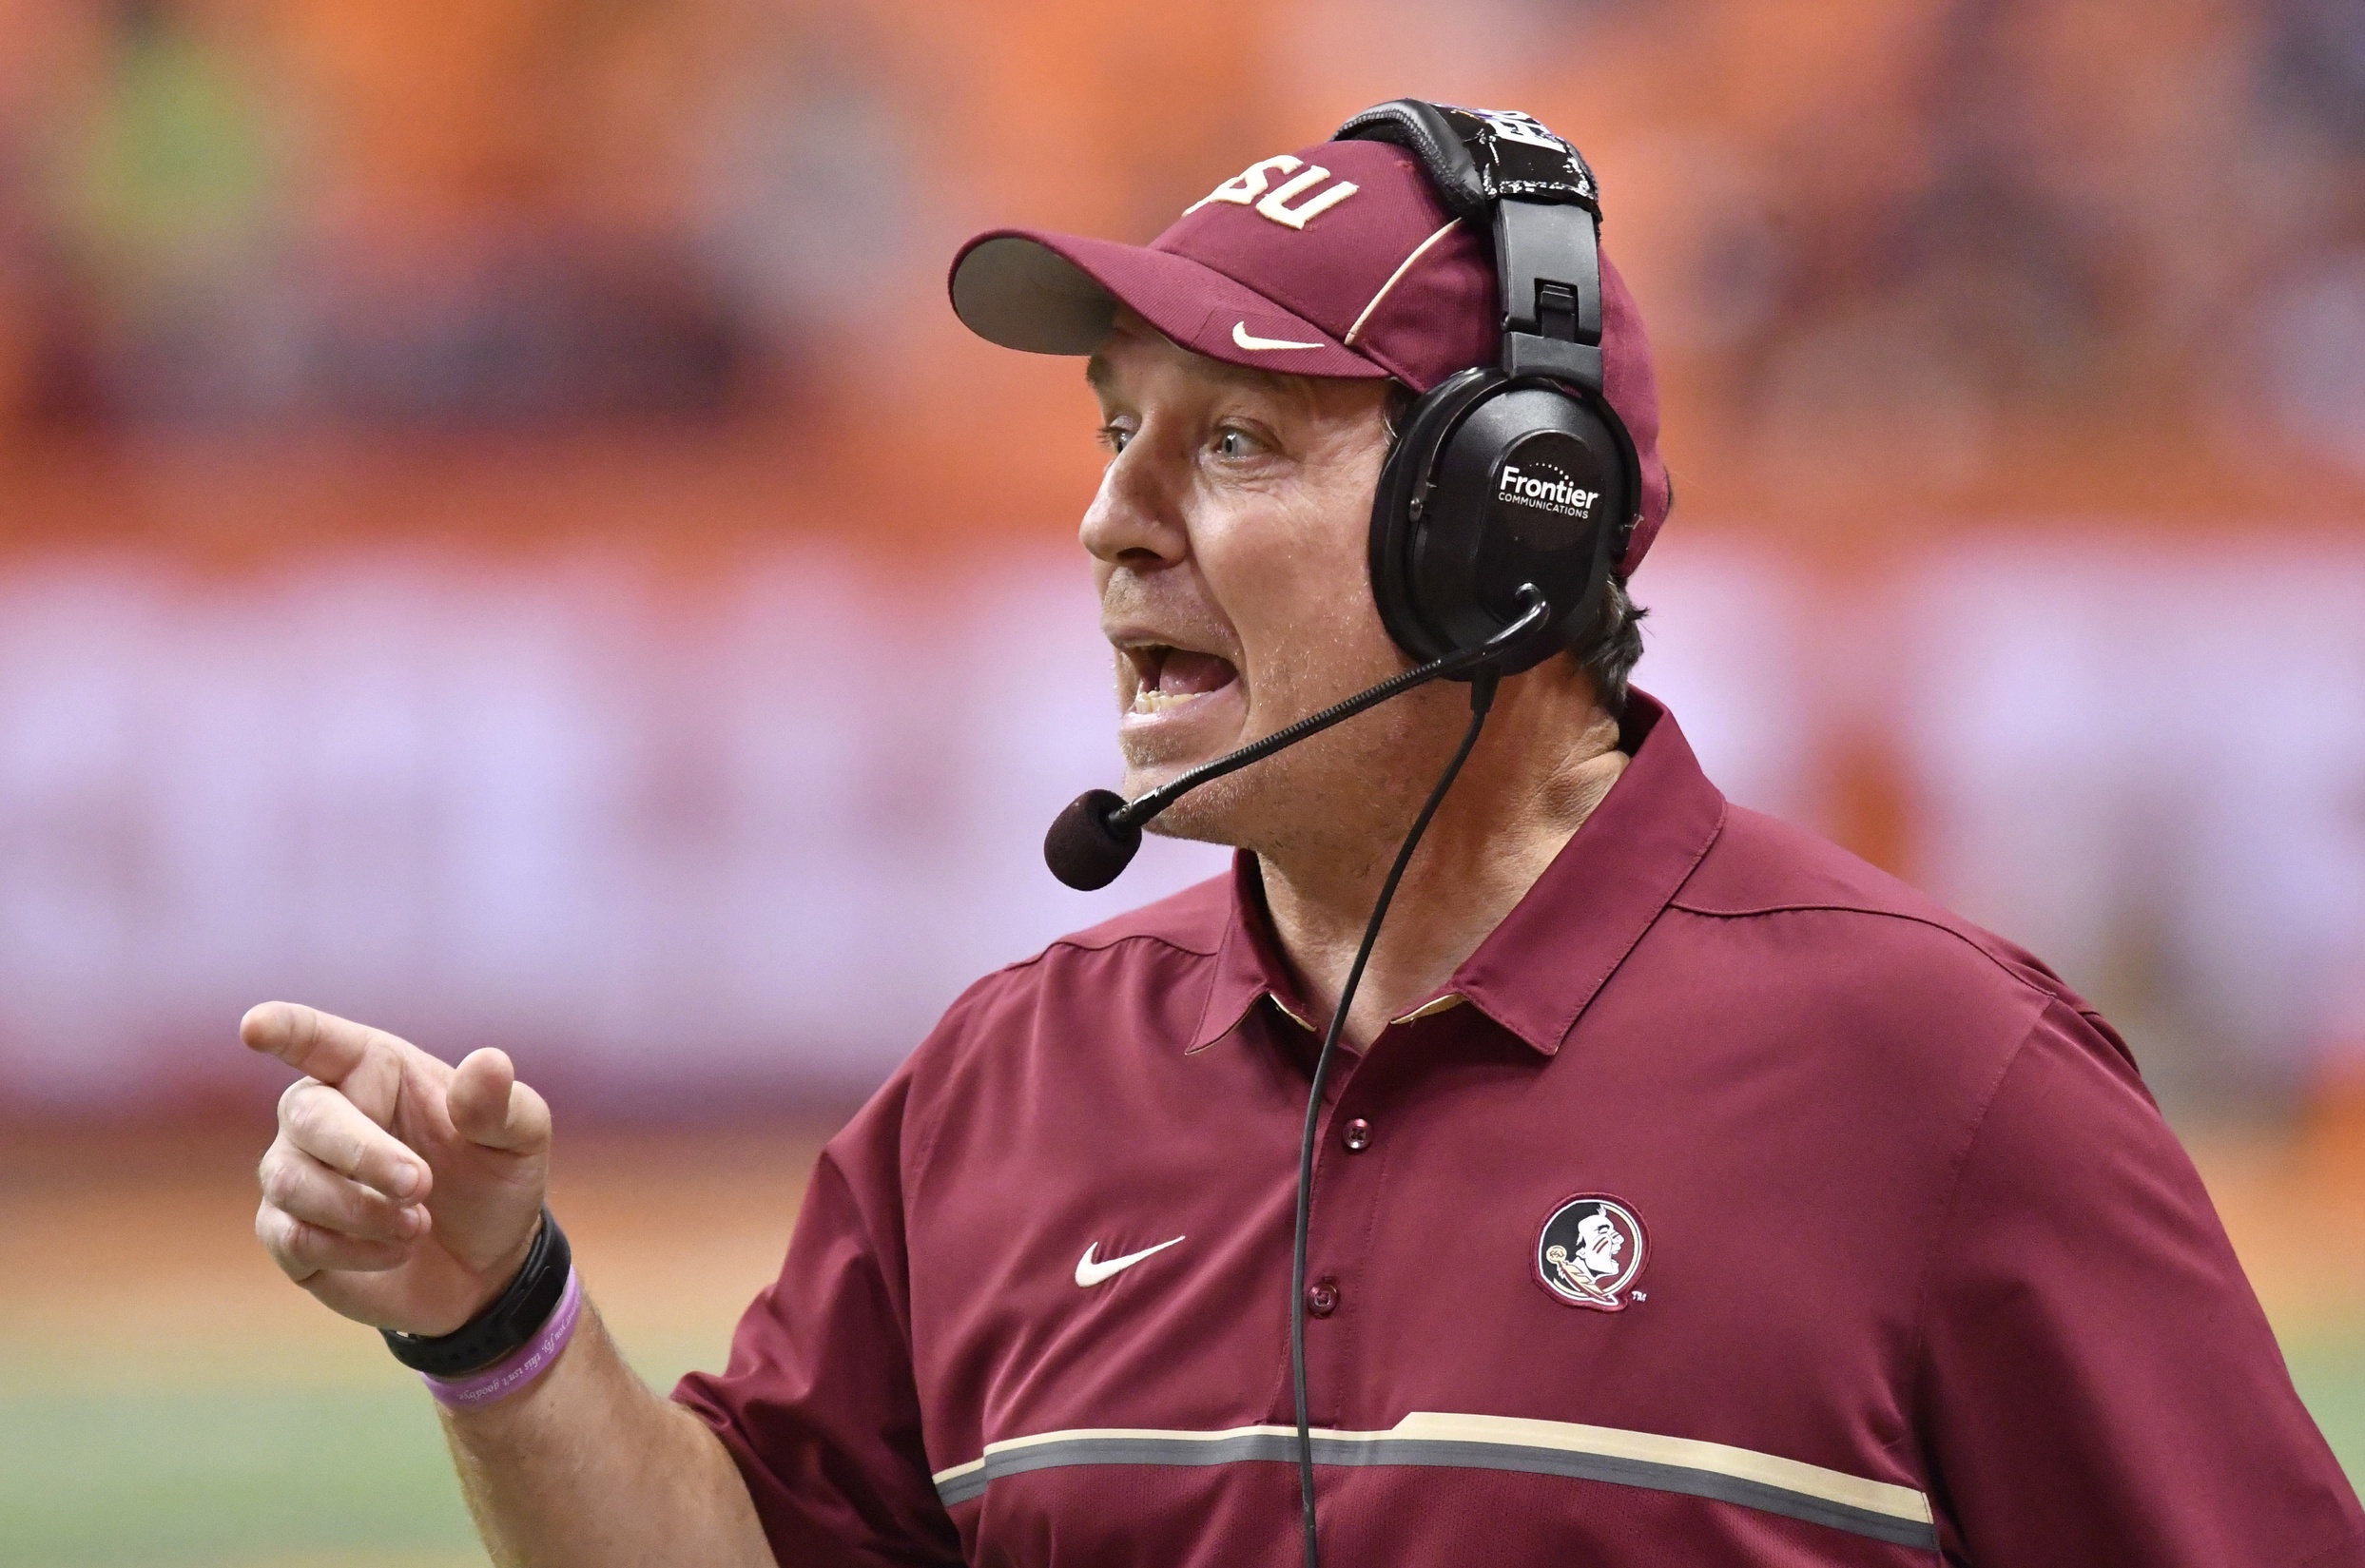 Nov 19, 2016; Syracuse, NY, USA; Florida State Seminoles head coach Jimbo Fisher has a word with an official to dispute a call during the fourth quarter of a game against the Syracuse Orange at the Carrier Dome. Florida State won 45-14. Mandatory Credit: Mark Konezny-USA TODAY Sports